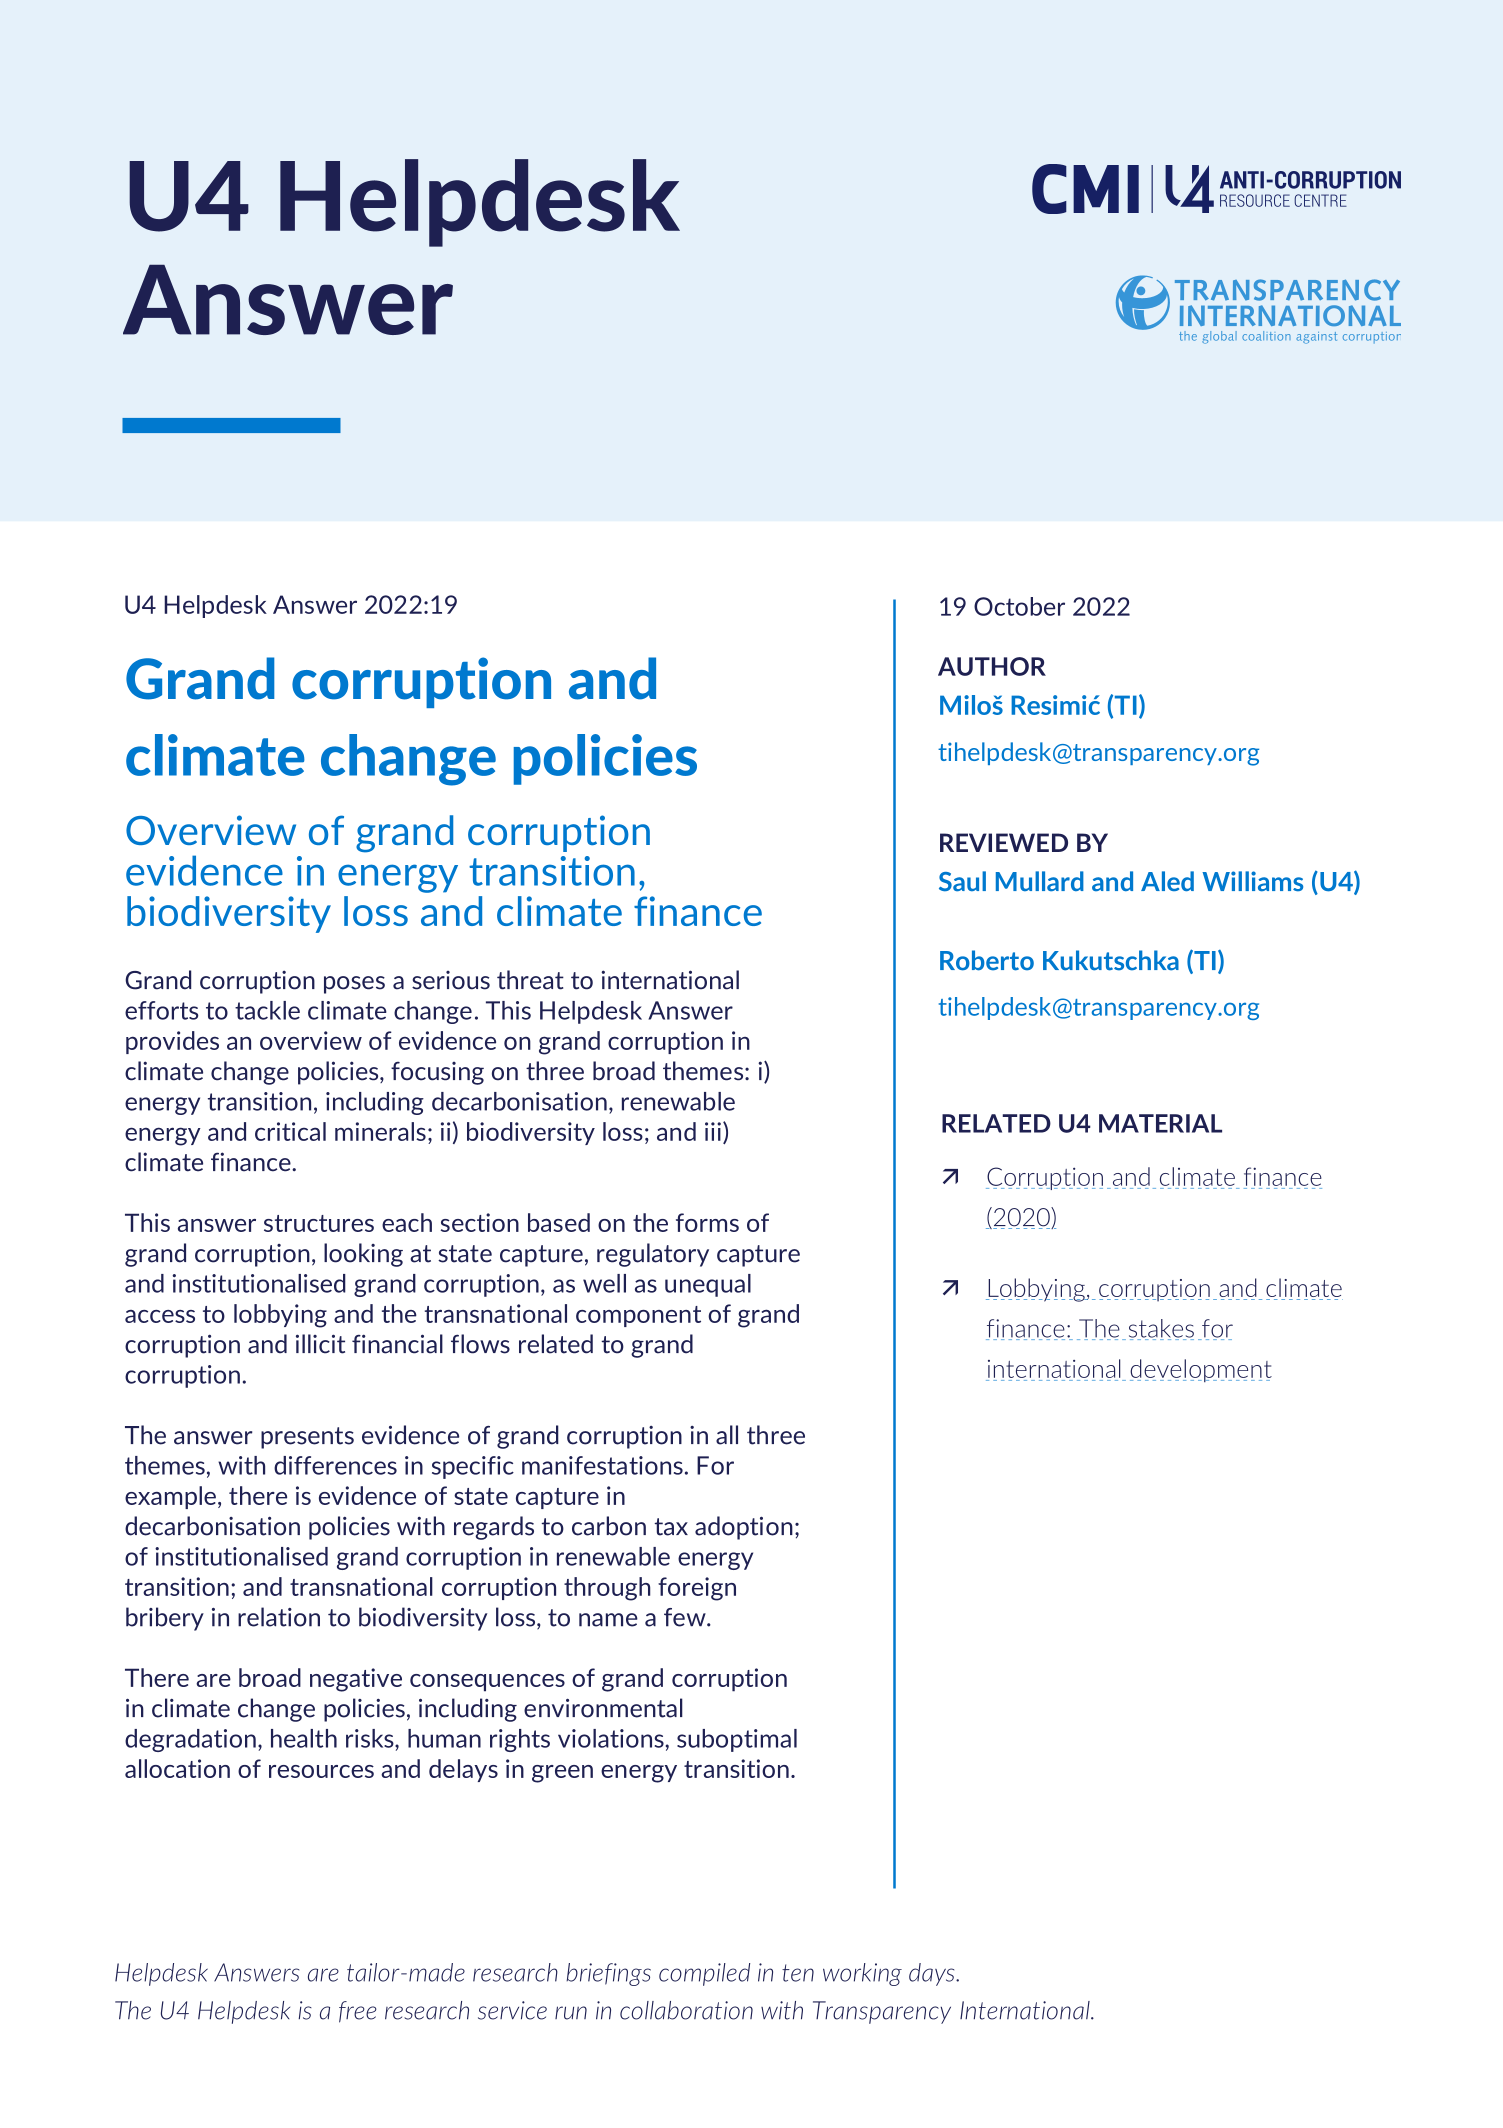 Grand corruption and climate change policies